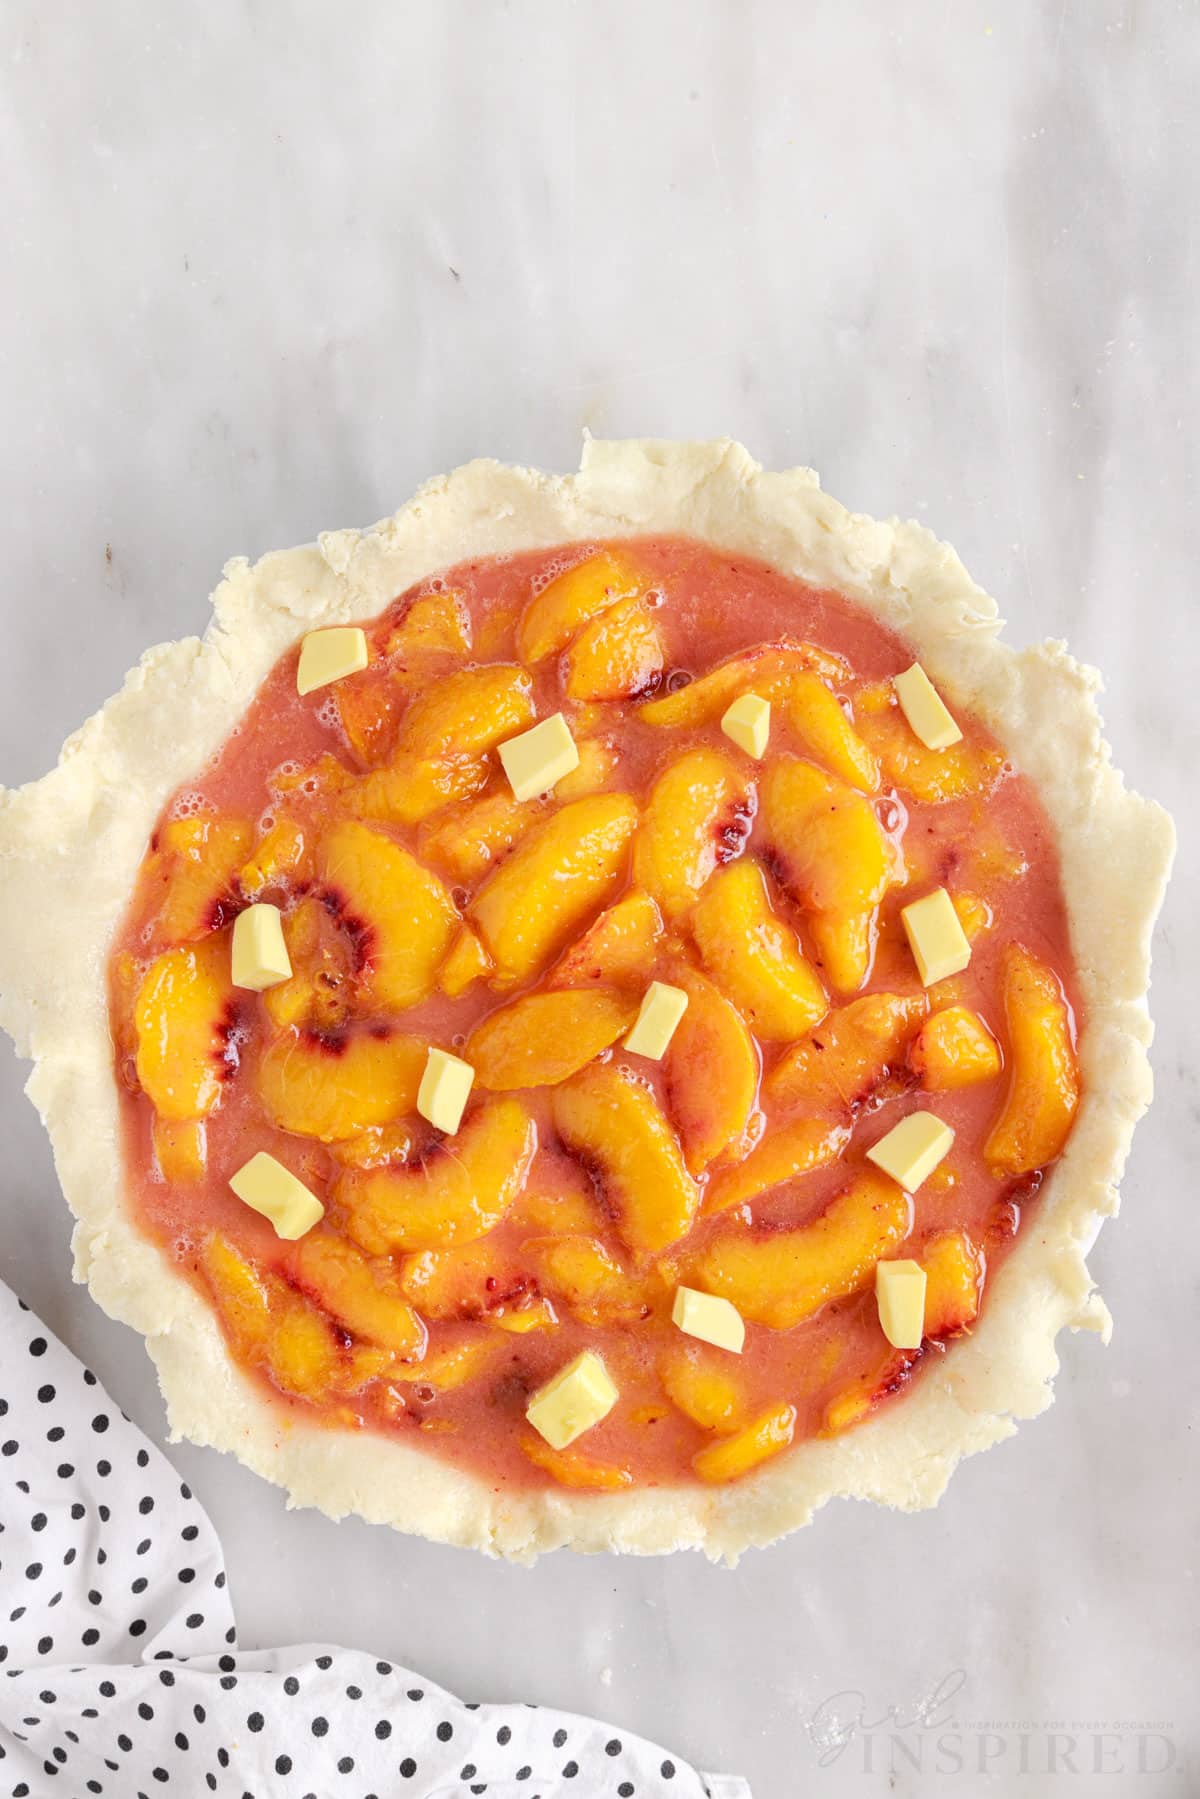 Butter added to sliced peaches in pie crust.